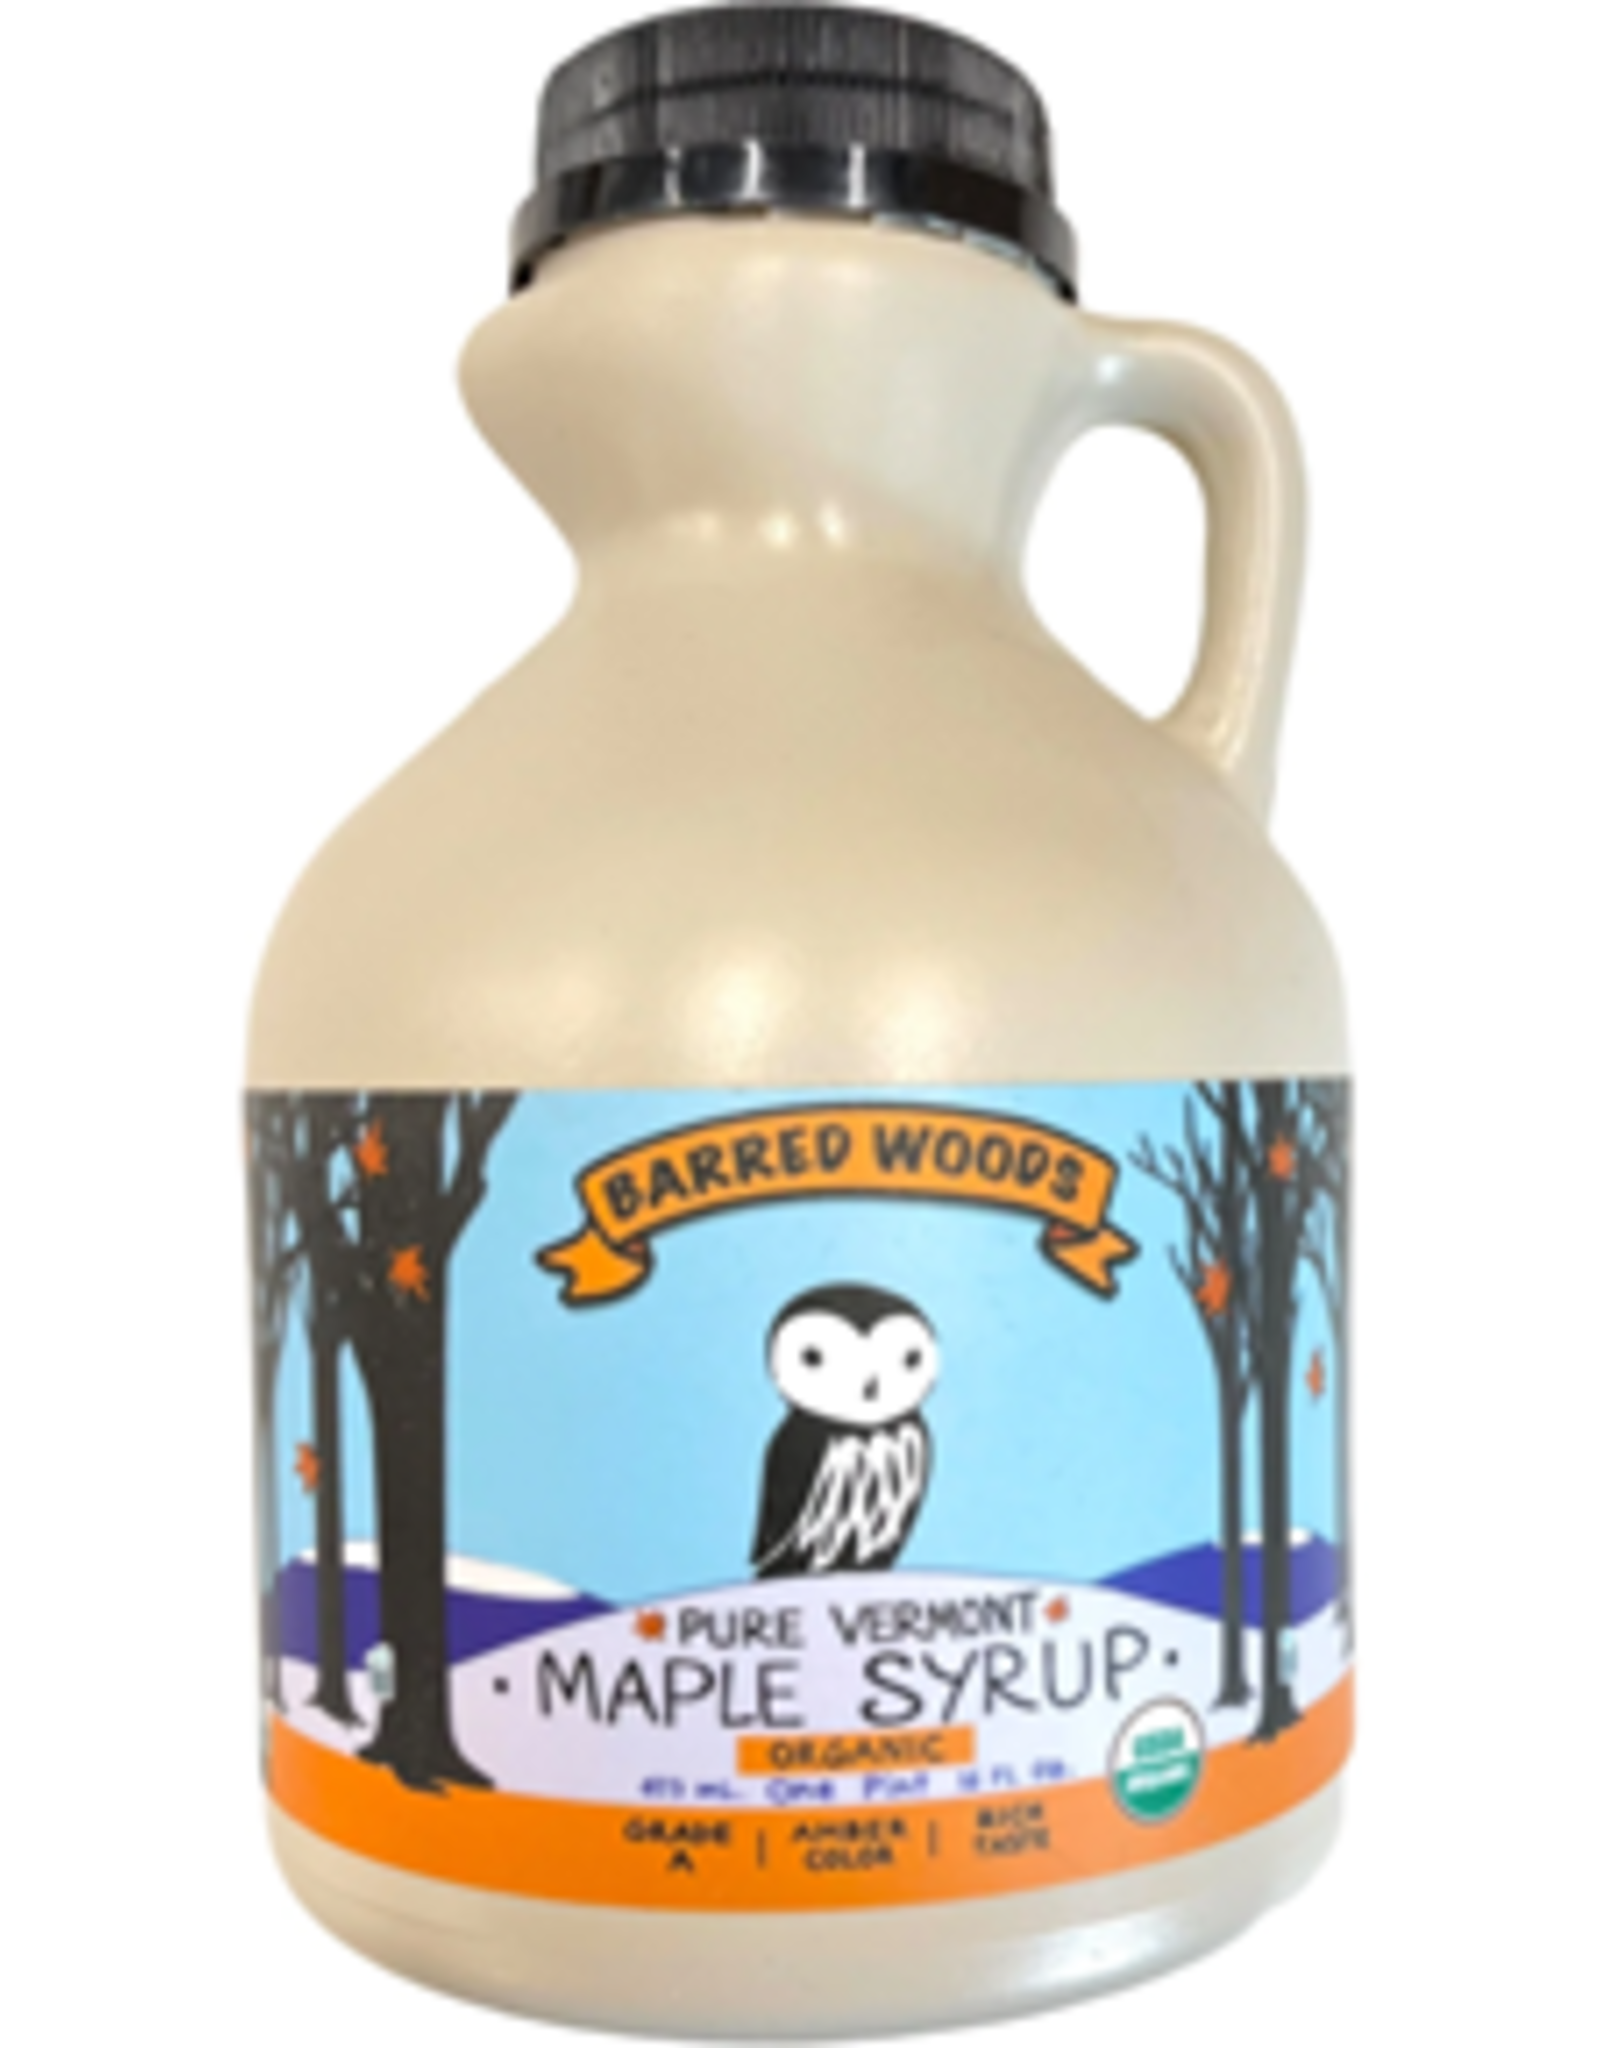 Barred Woods Organic Vermont Maple Syrup 16 oz